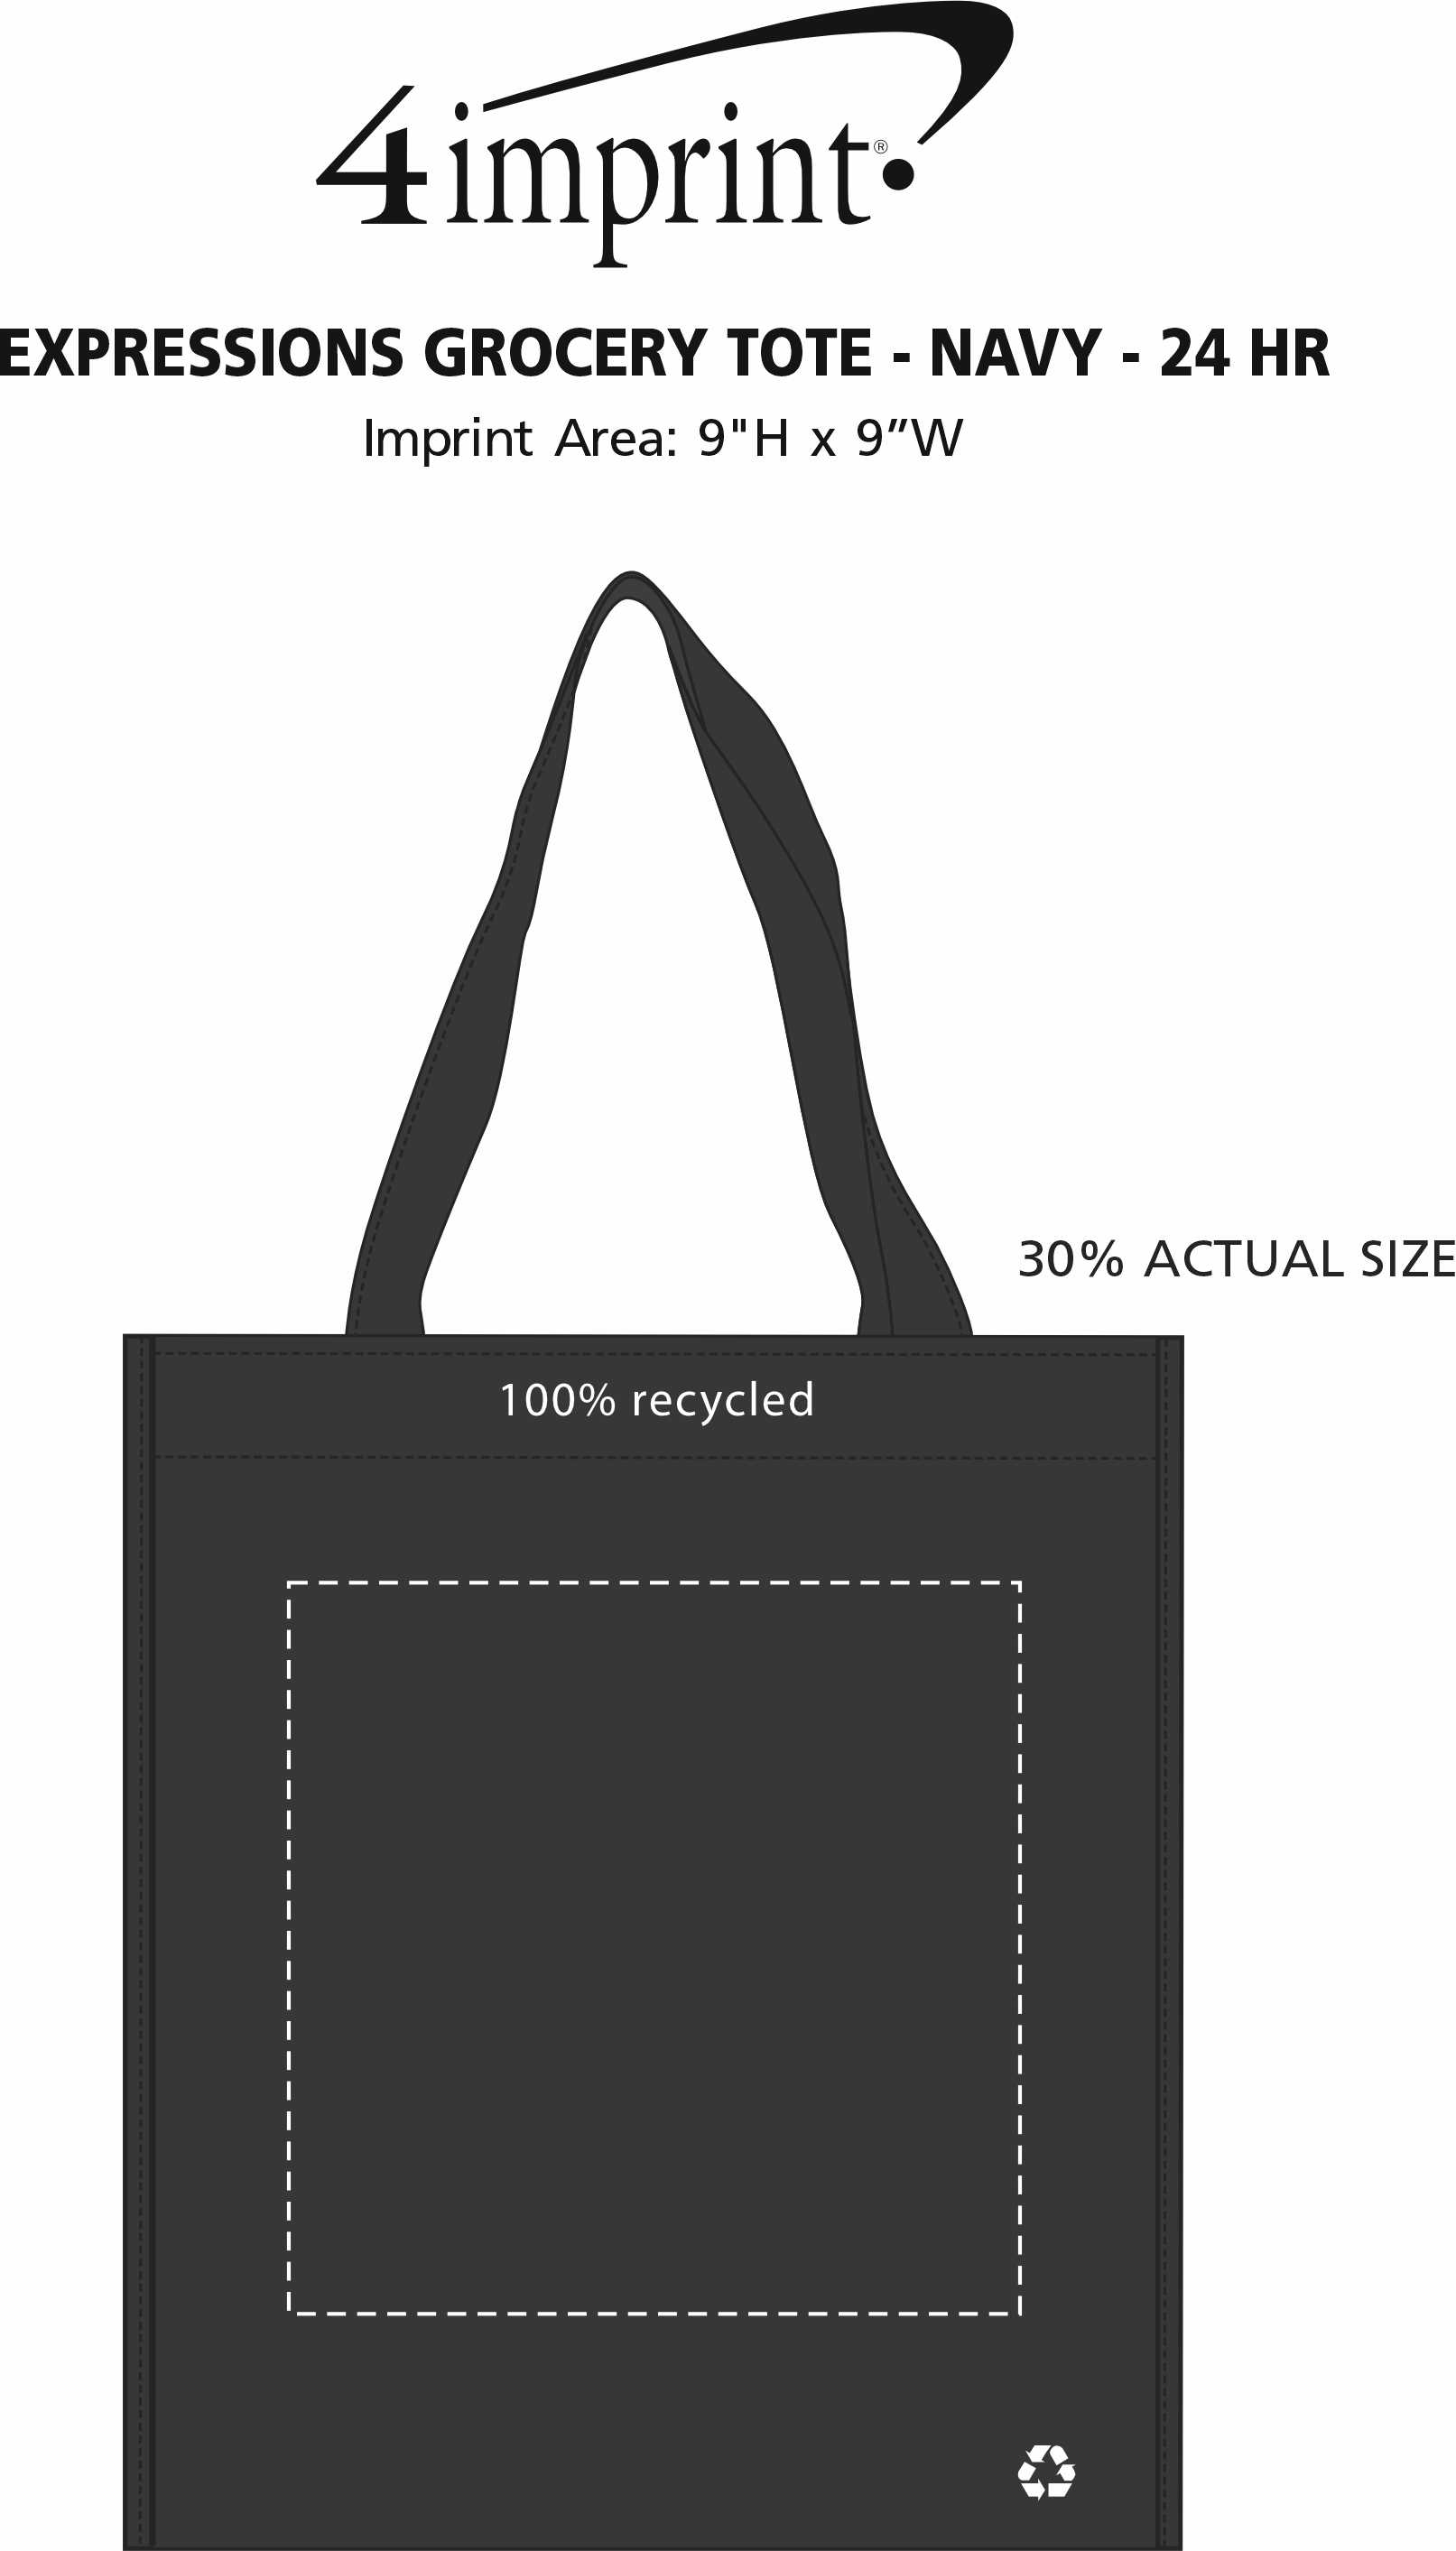 Imprint Area of Expressions Grocery Tote - Navy - 24 hr